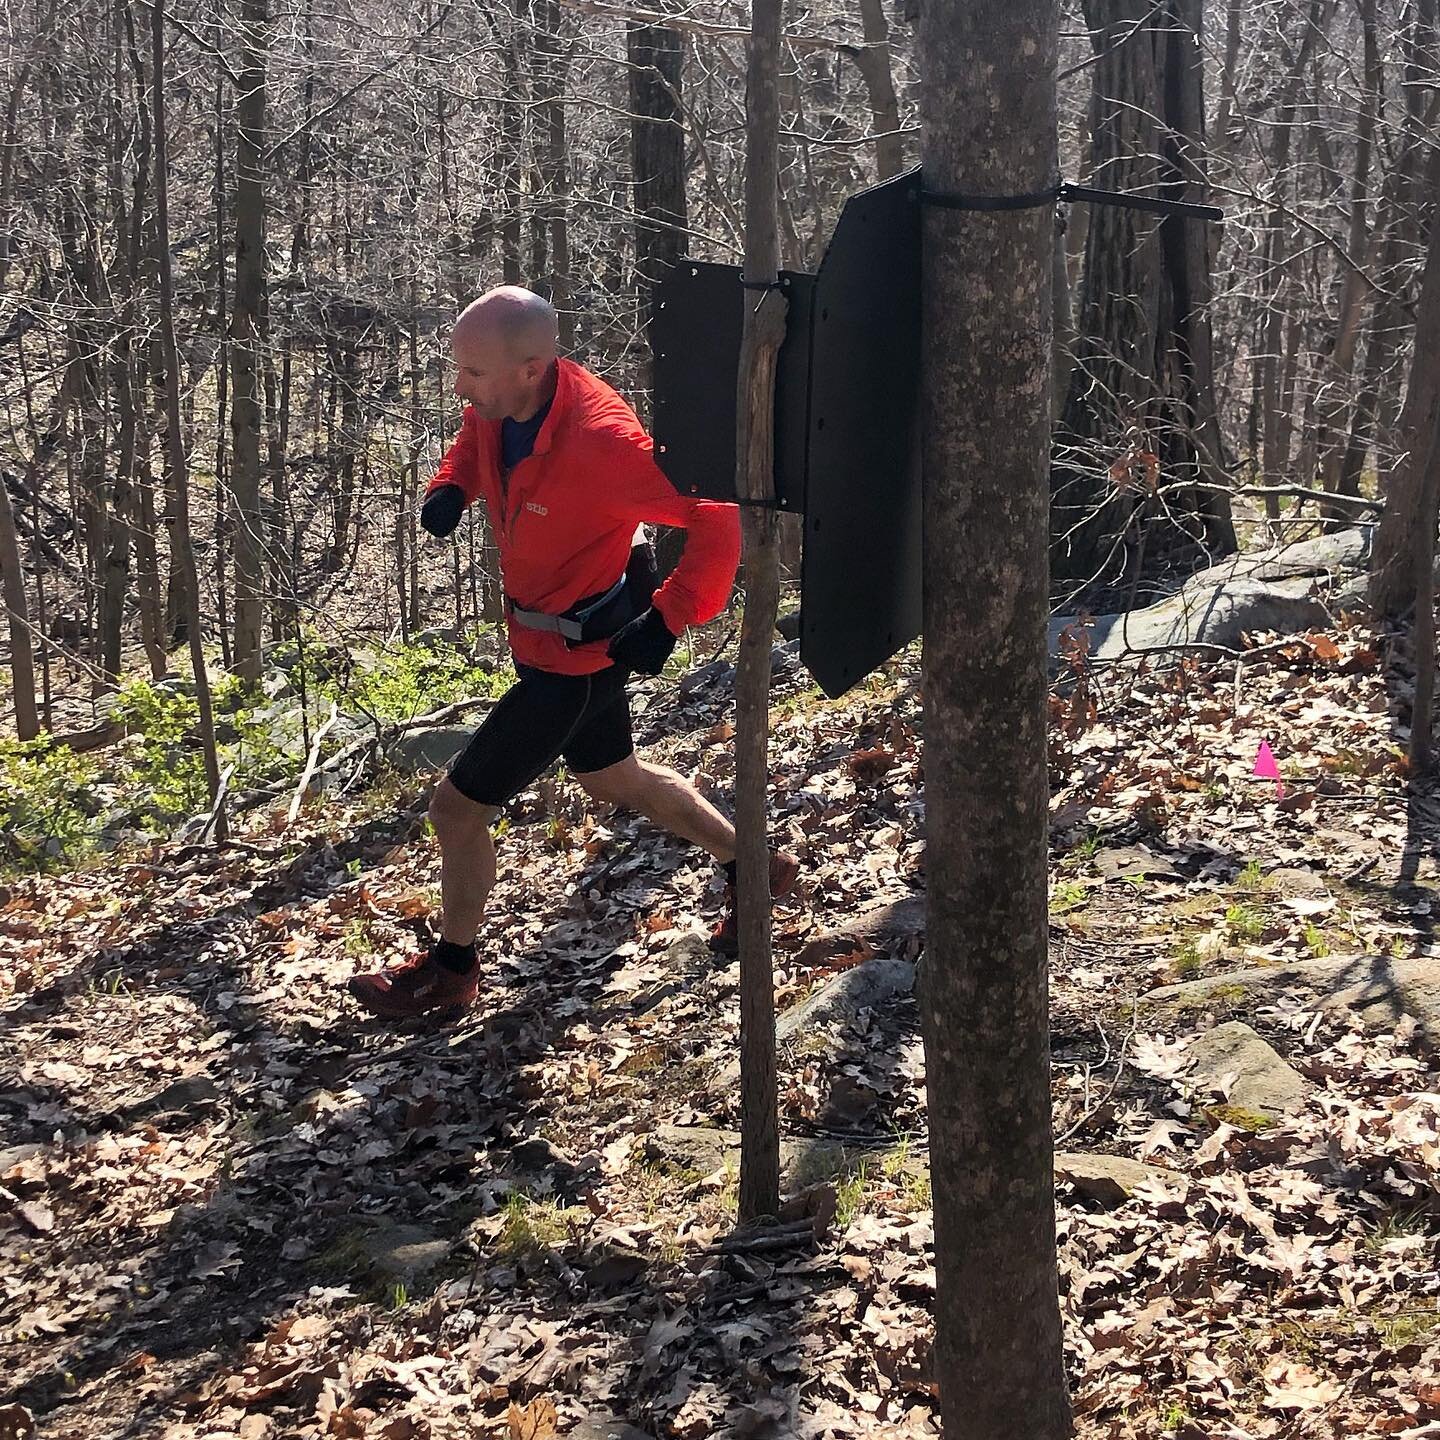 There are only 35 registration spots remaining for the 2023 @rednewtracing Breakneck Point Trail Runs! This year's half marathon (21k) has been selected as one of the official races of the Golden Trail National Series! Here is MPF coach Ben Nephew's 